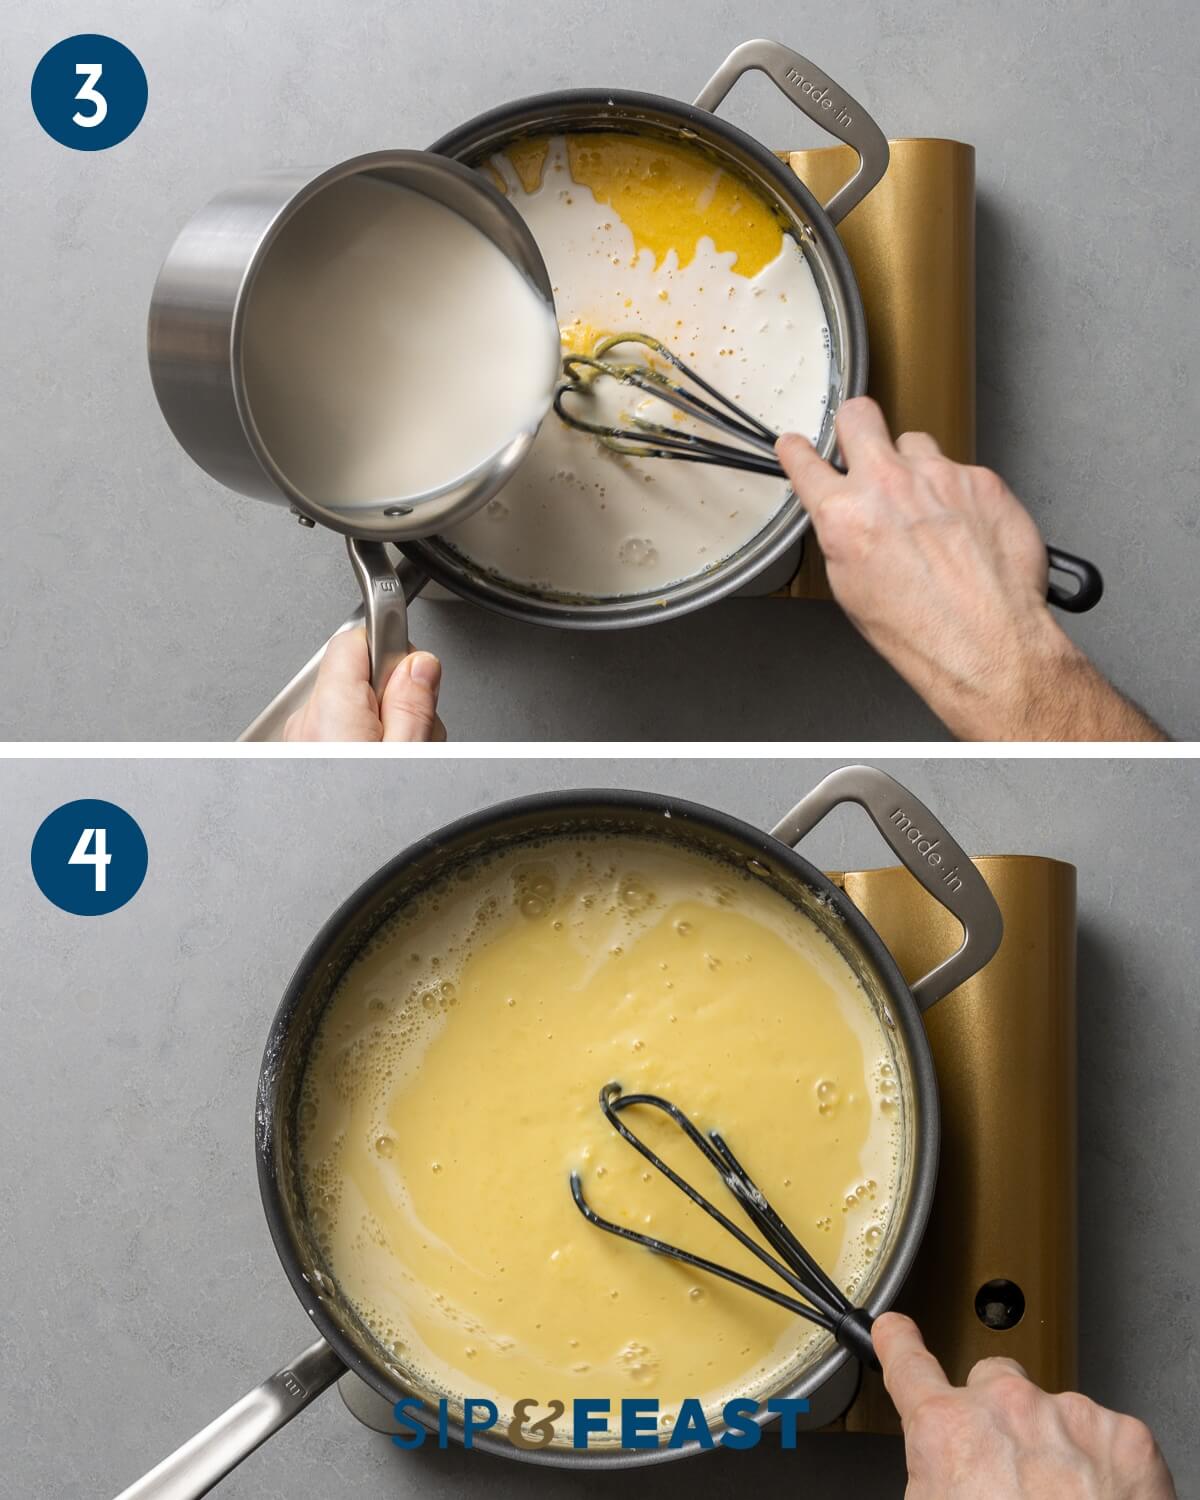 Recipe collage group two showing pouring warm milk into pan and whisking of pastry cream over burner.